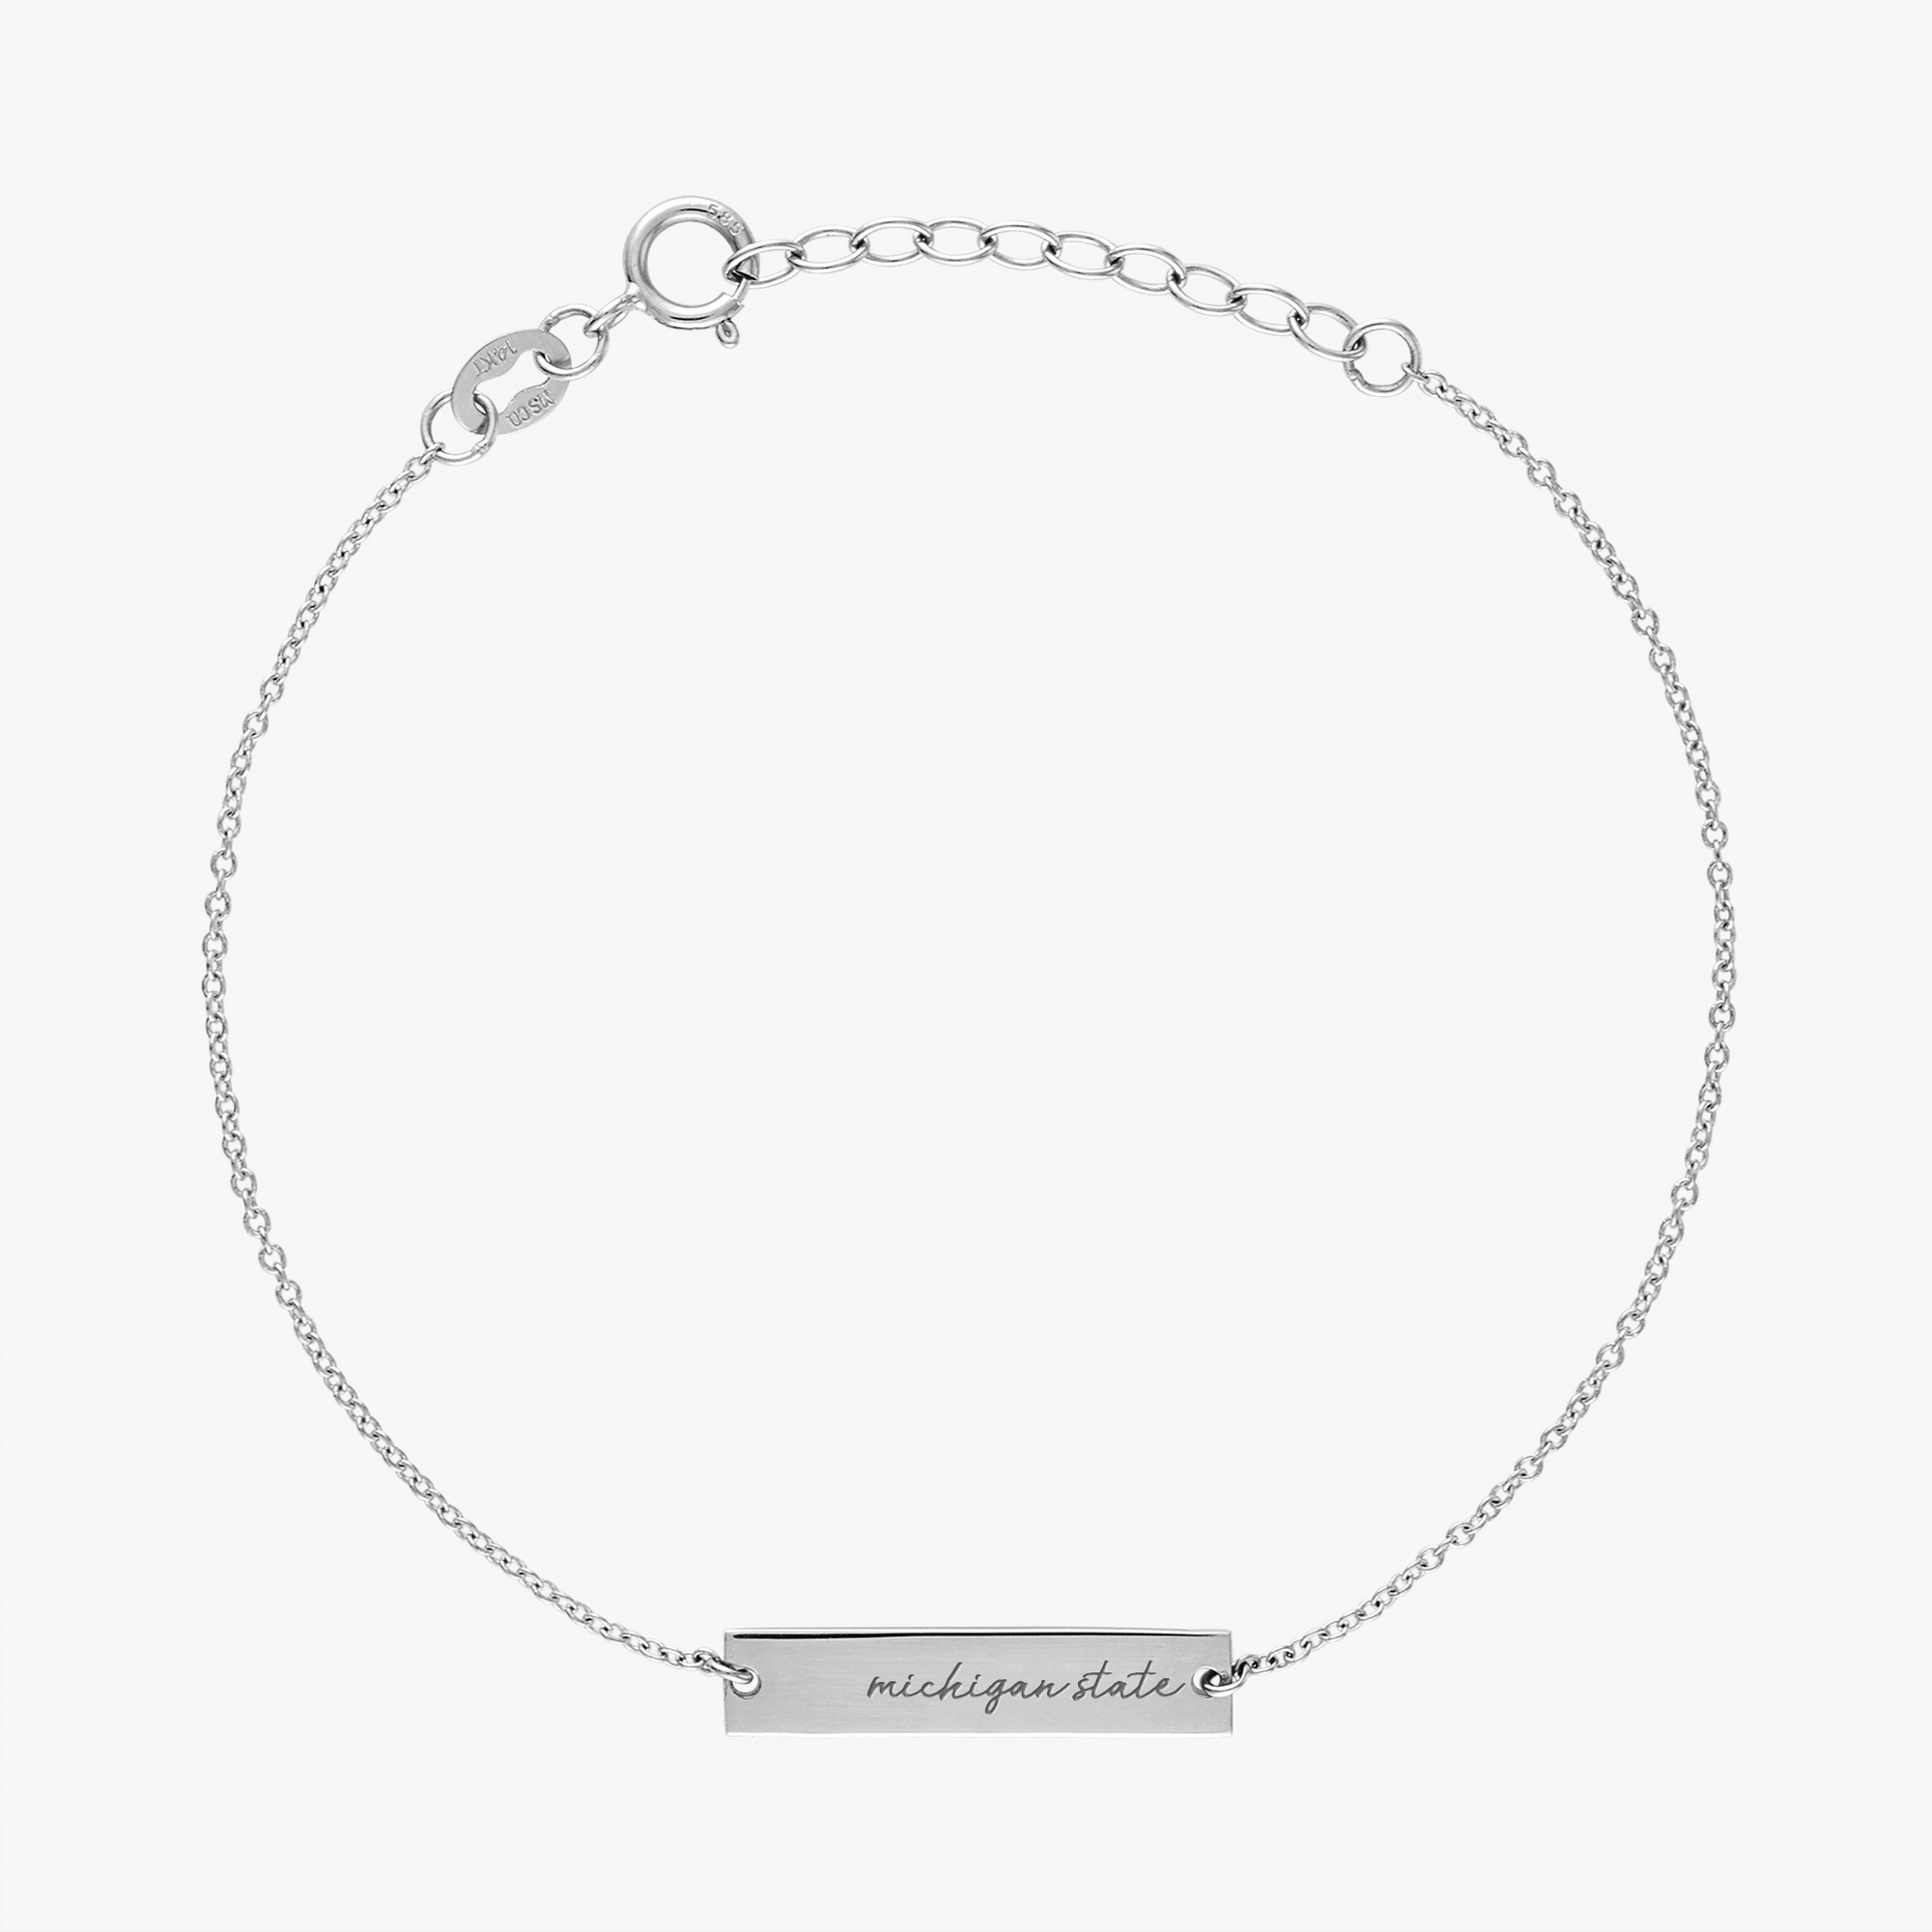 Michigan State Horizontal Necklace Sterling Silver